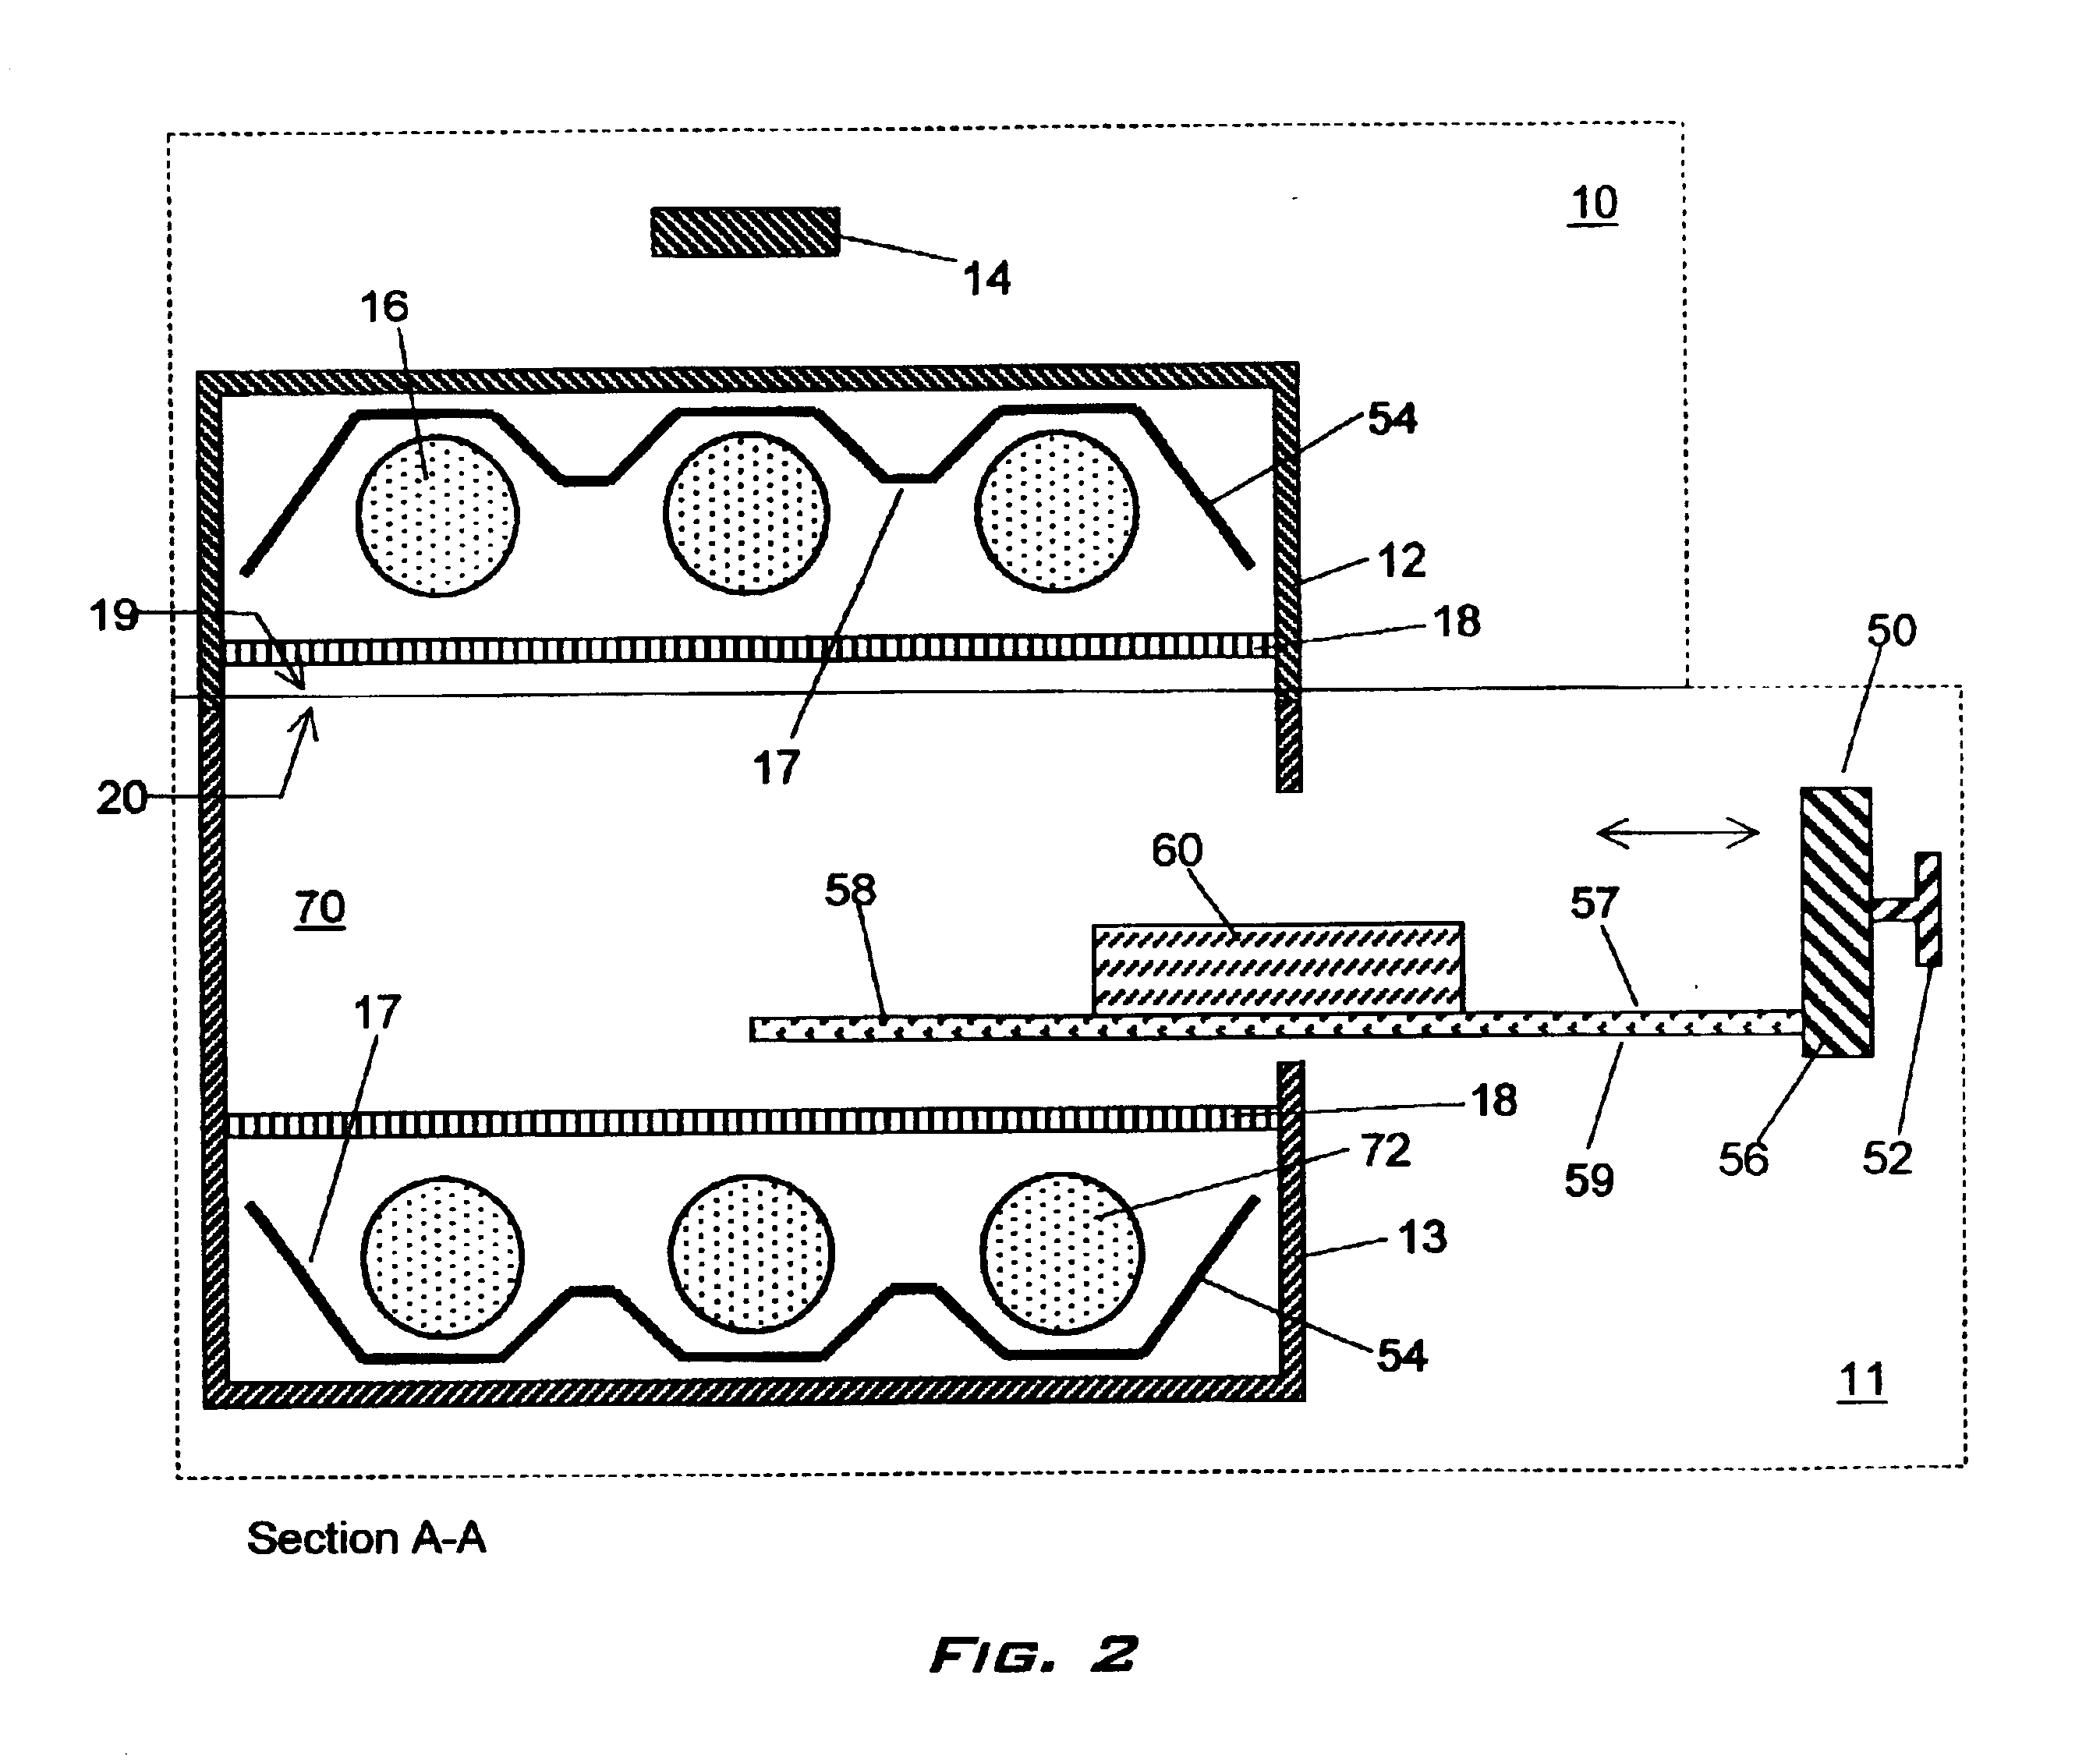 Apparatus for neutralizing chemical and biological threats